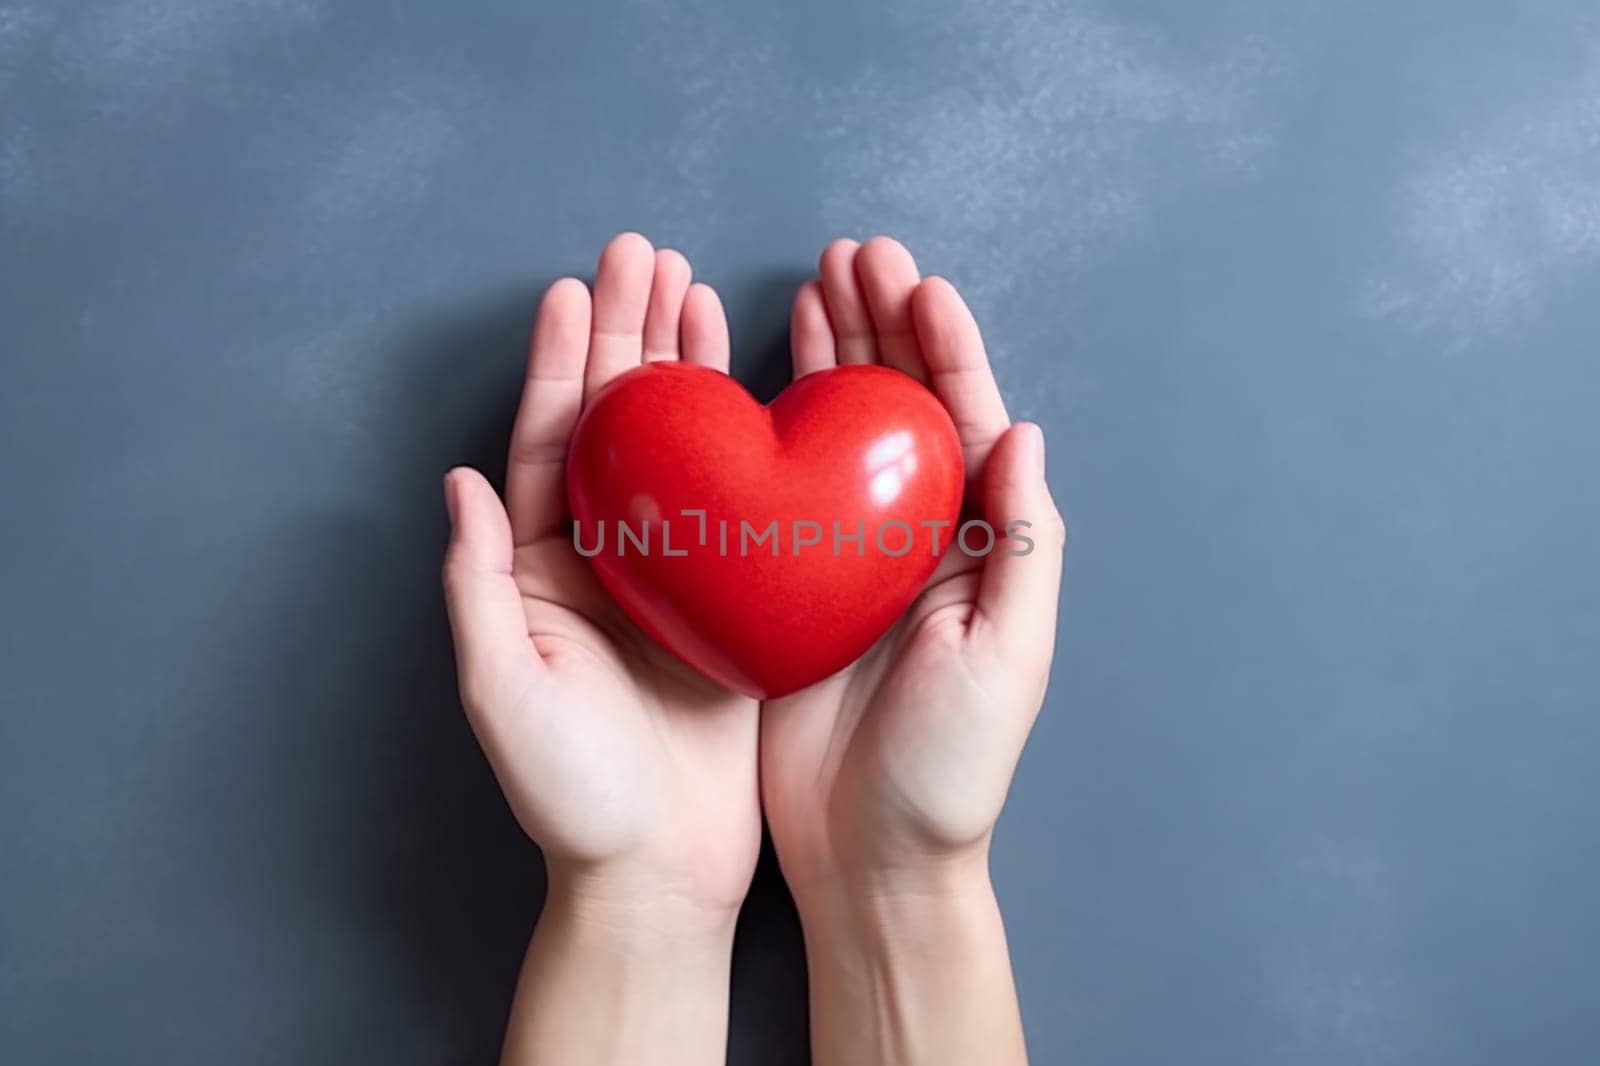 Hands holding a red heart against a grey background by Hype2art